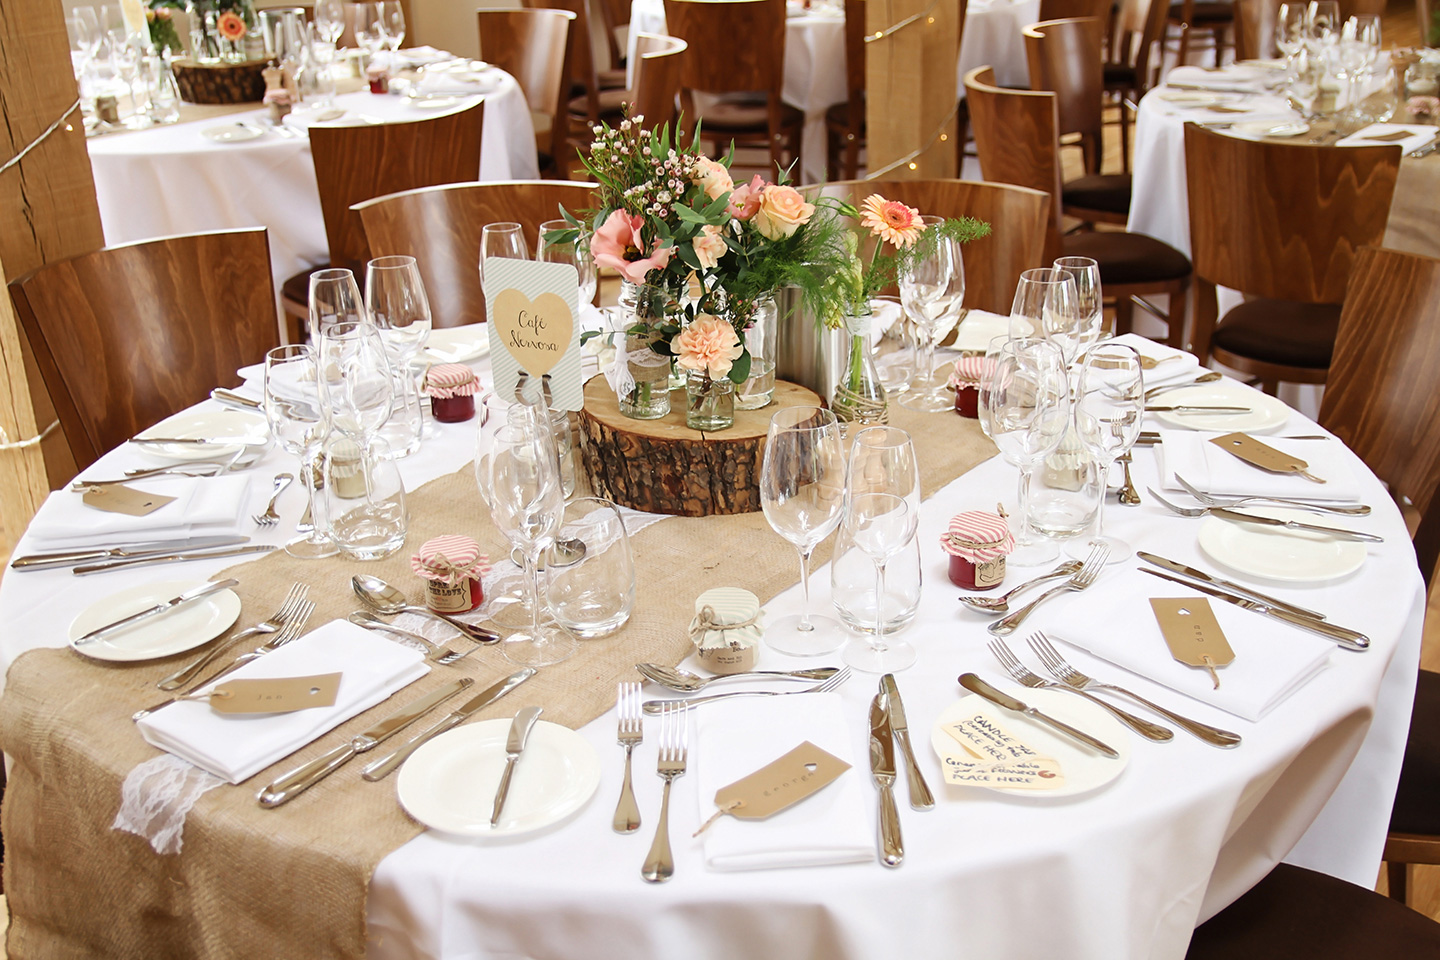 Tables in the Bridge Barn at Bassmead Manor Barns are set up for a rustic wedding breakfast